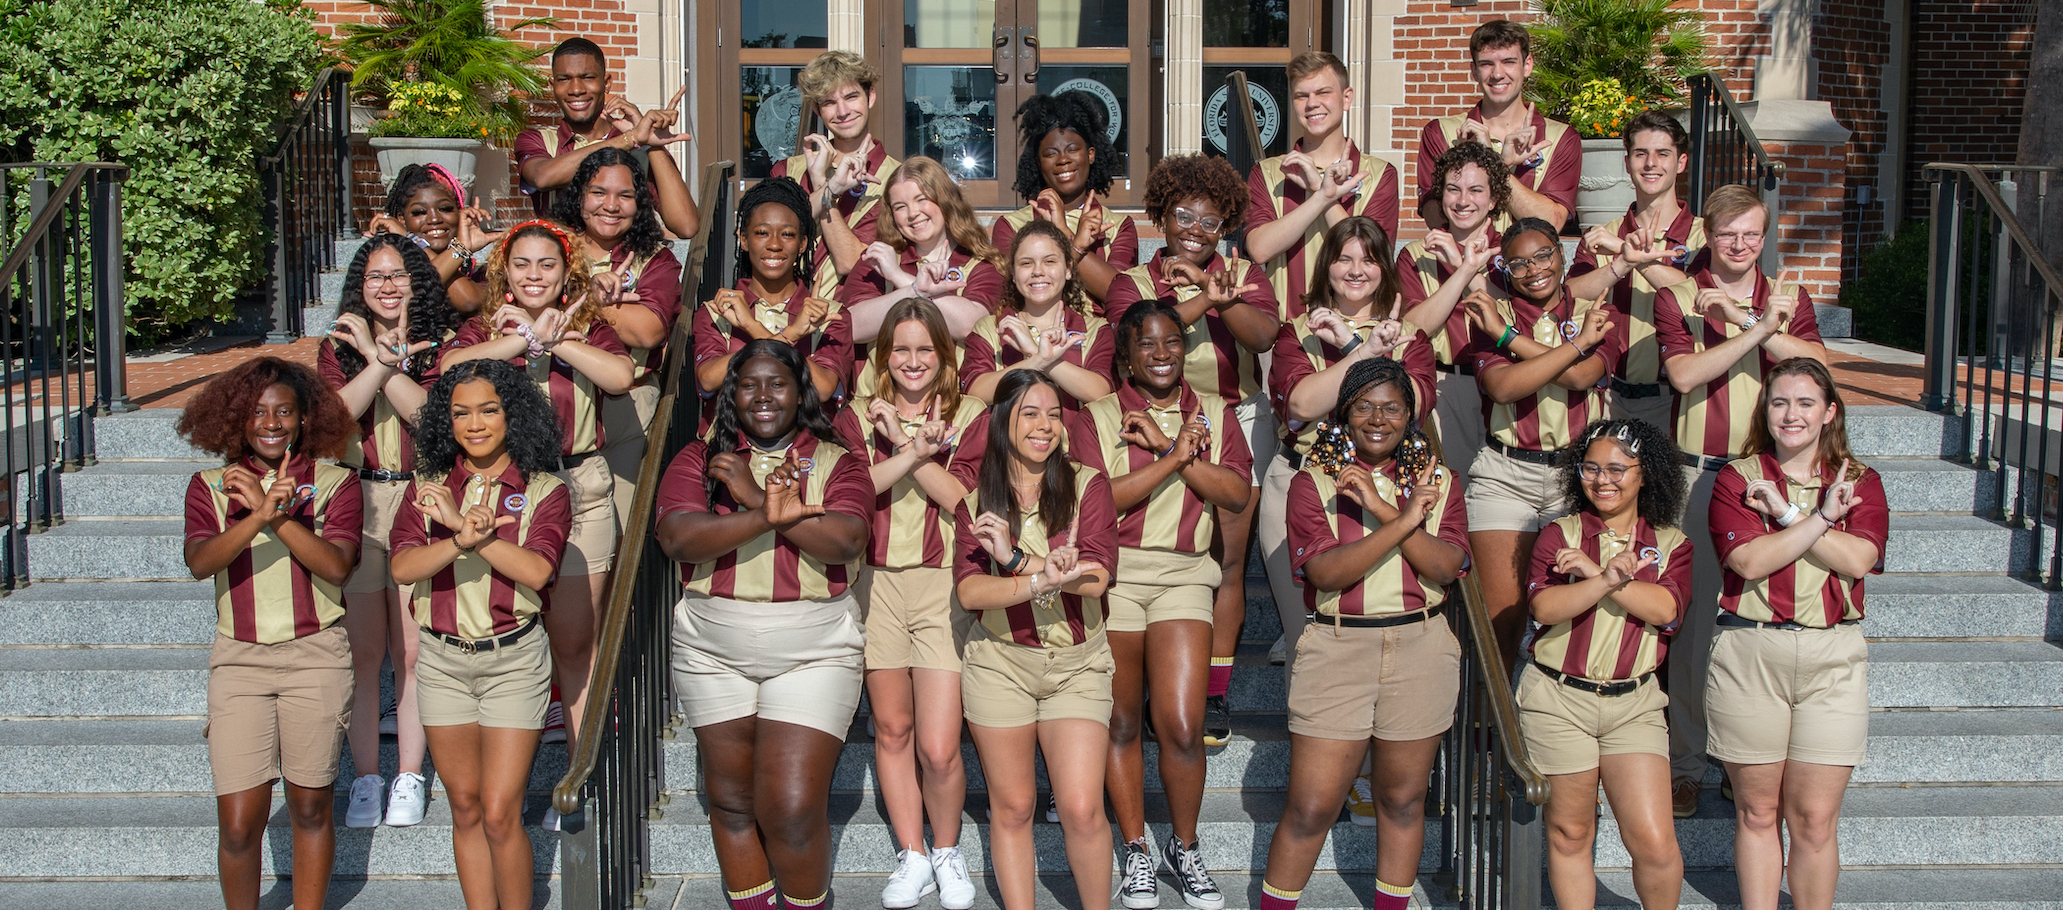 2022 Orientation Leaders with "O" "L" hands